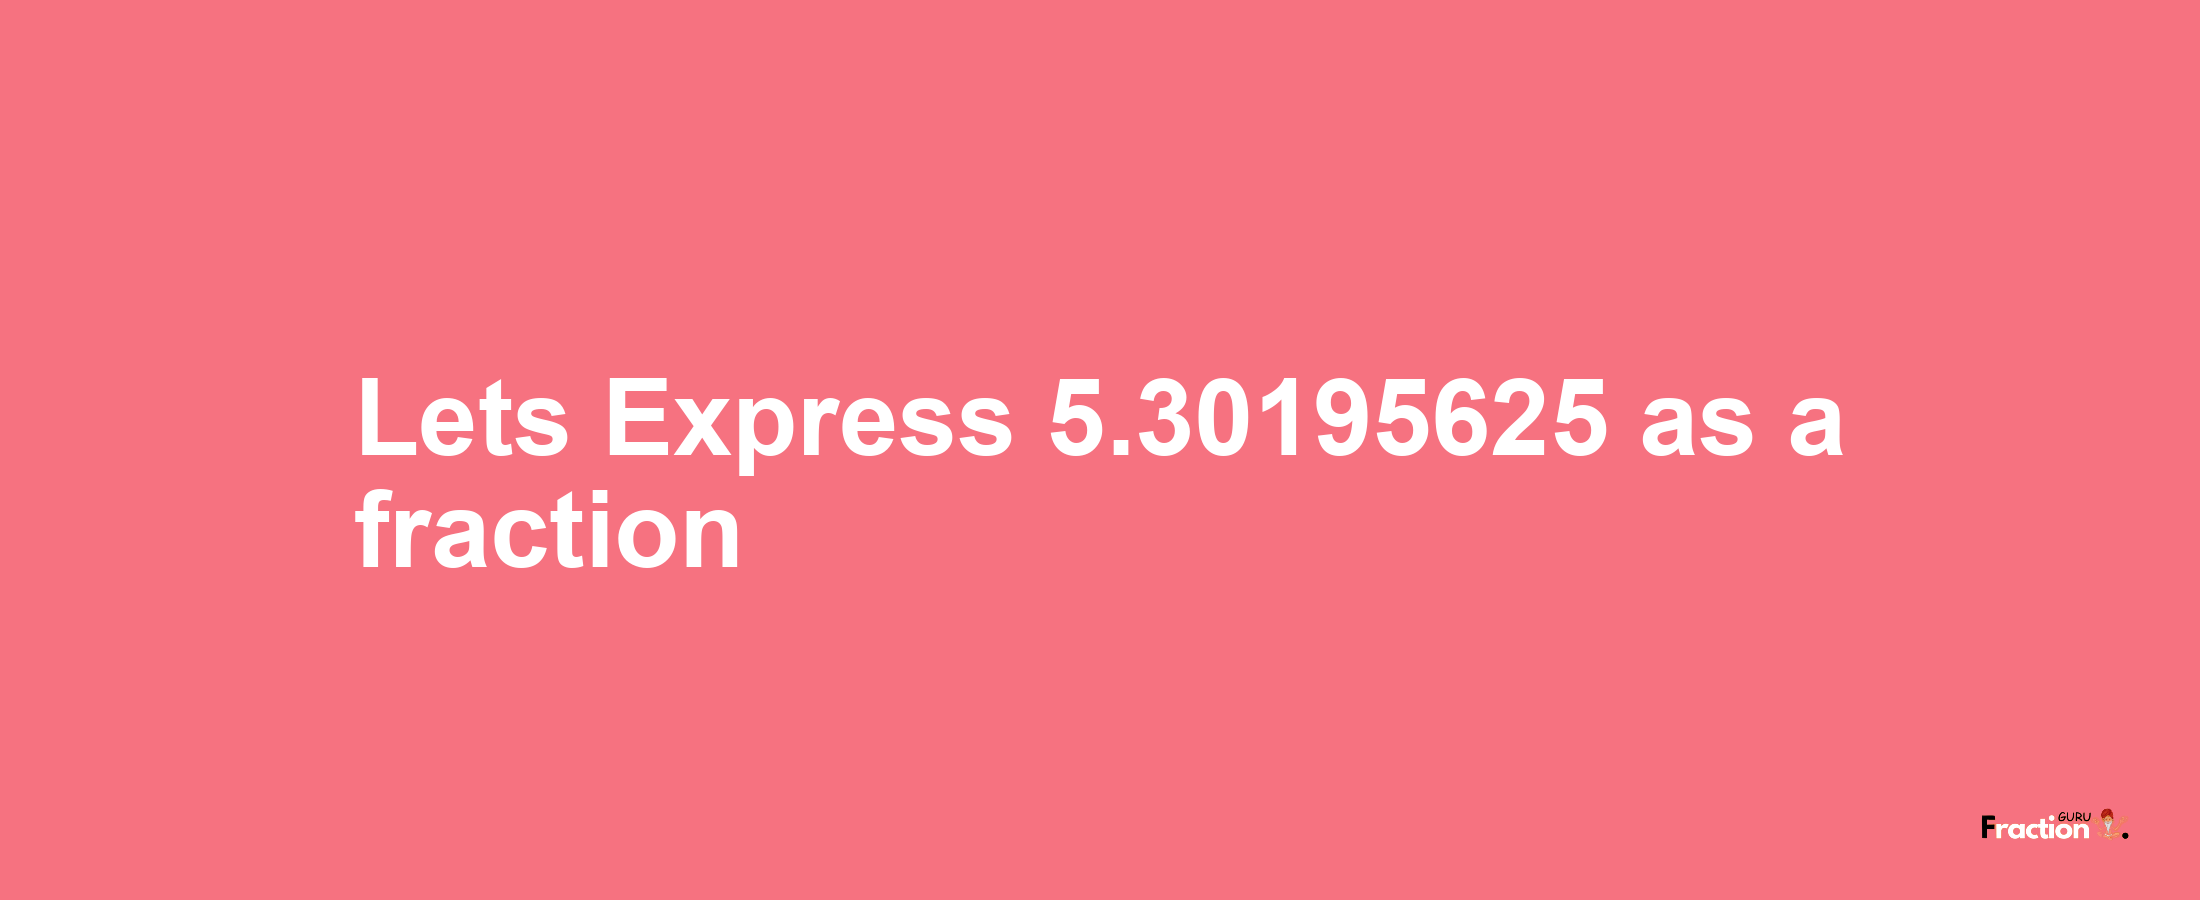 Lets Express 5.30195625 as afraction